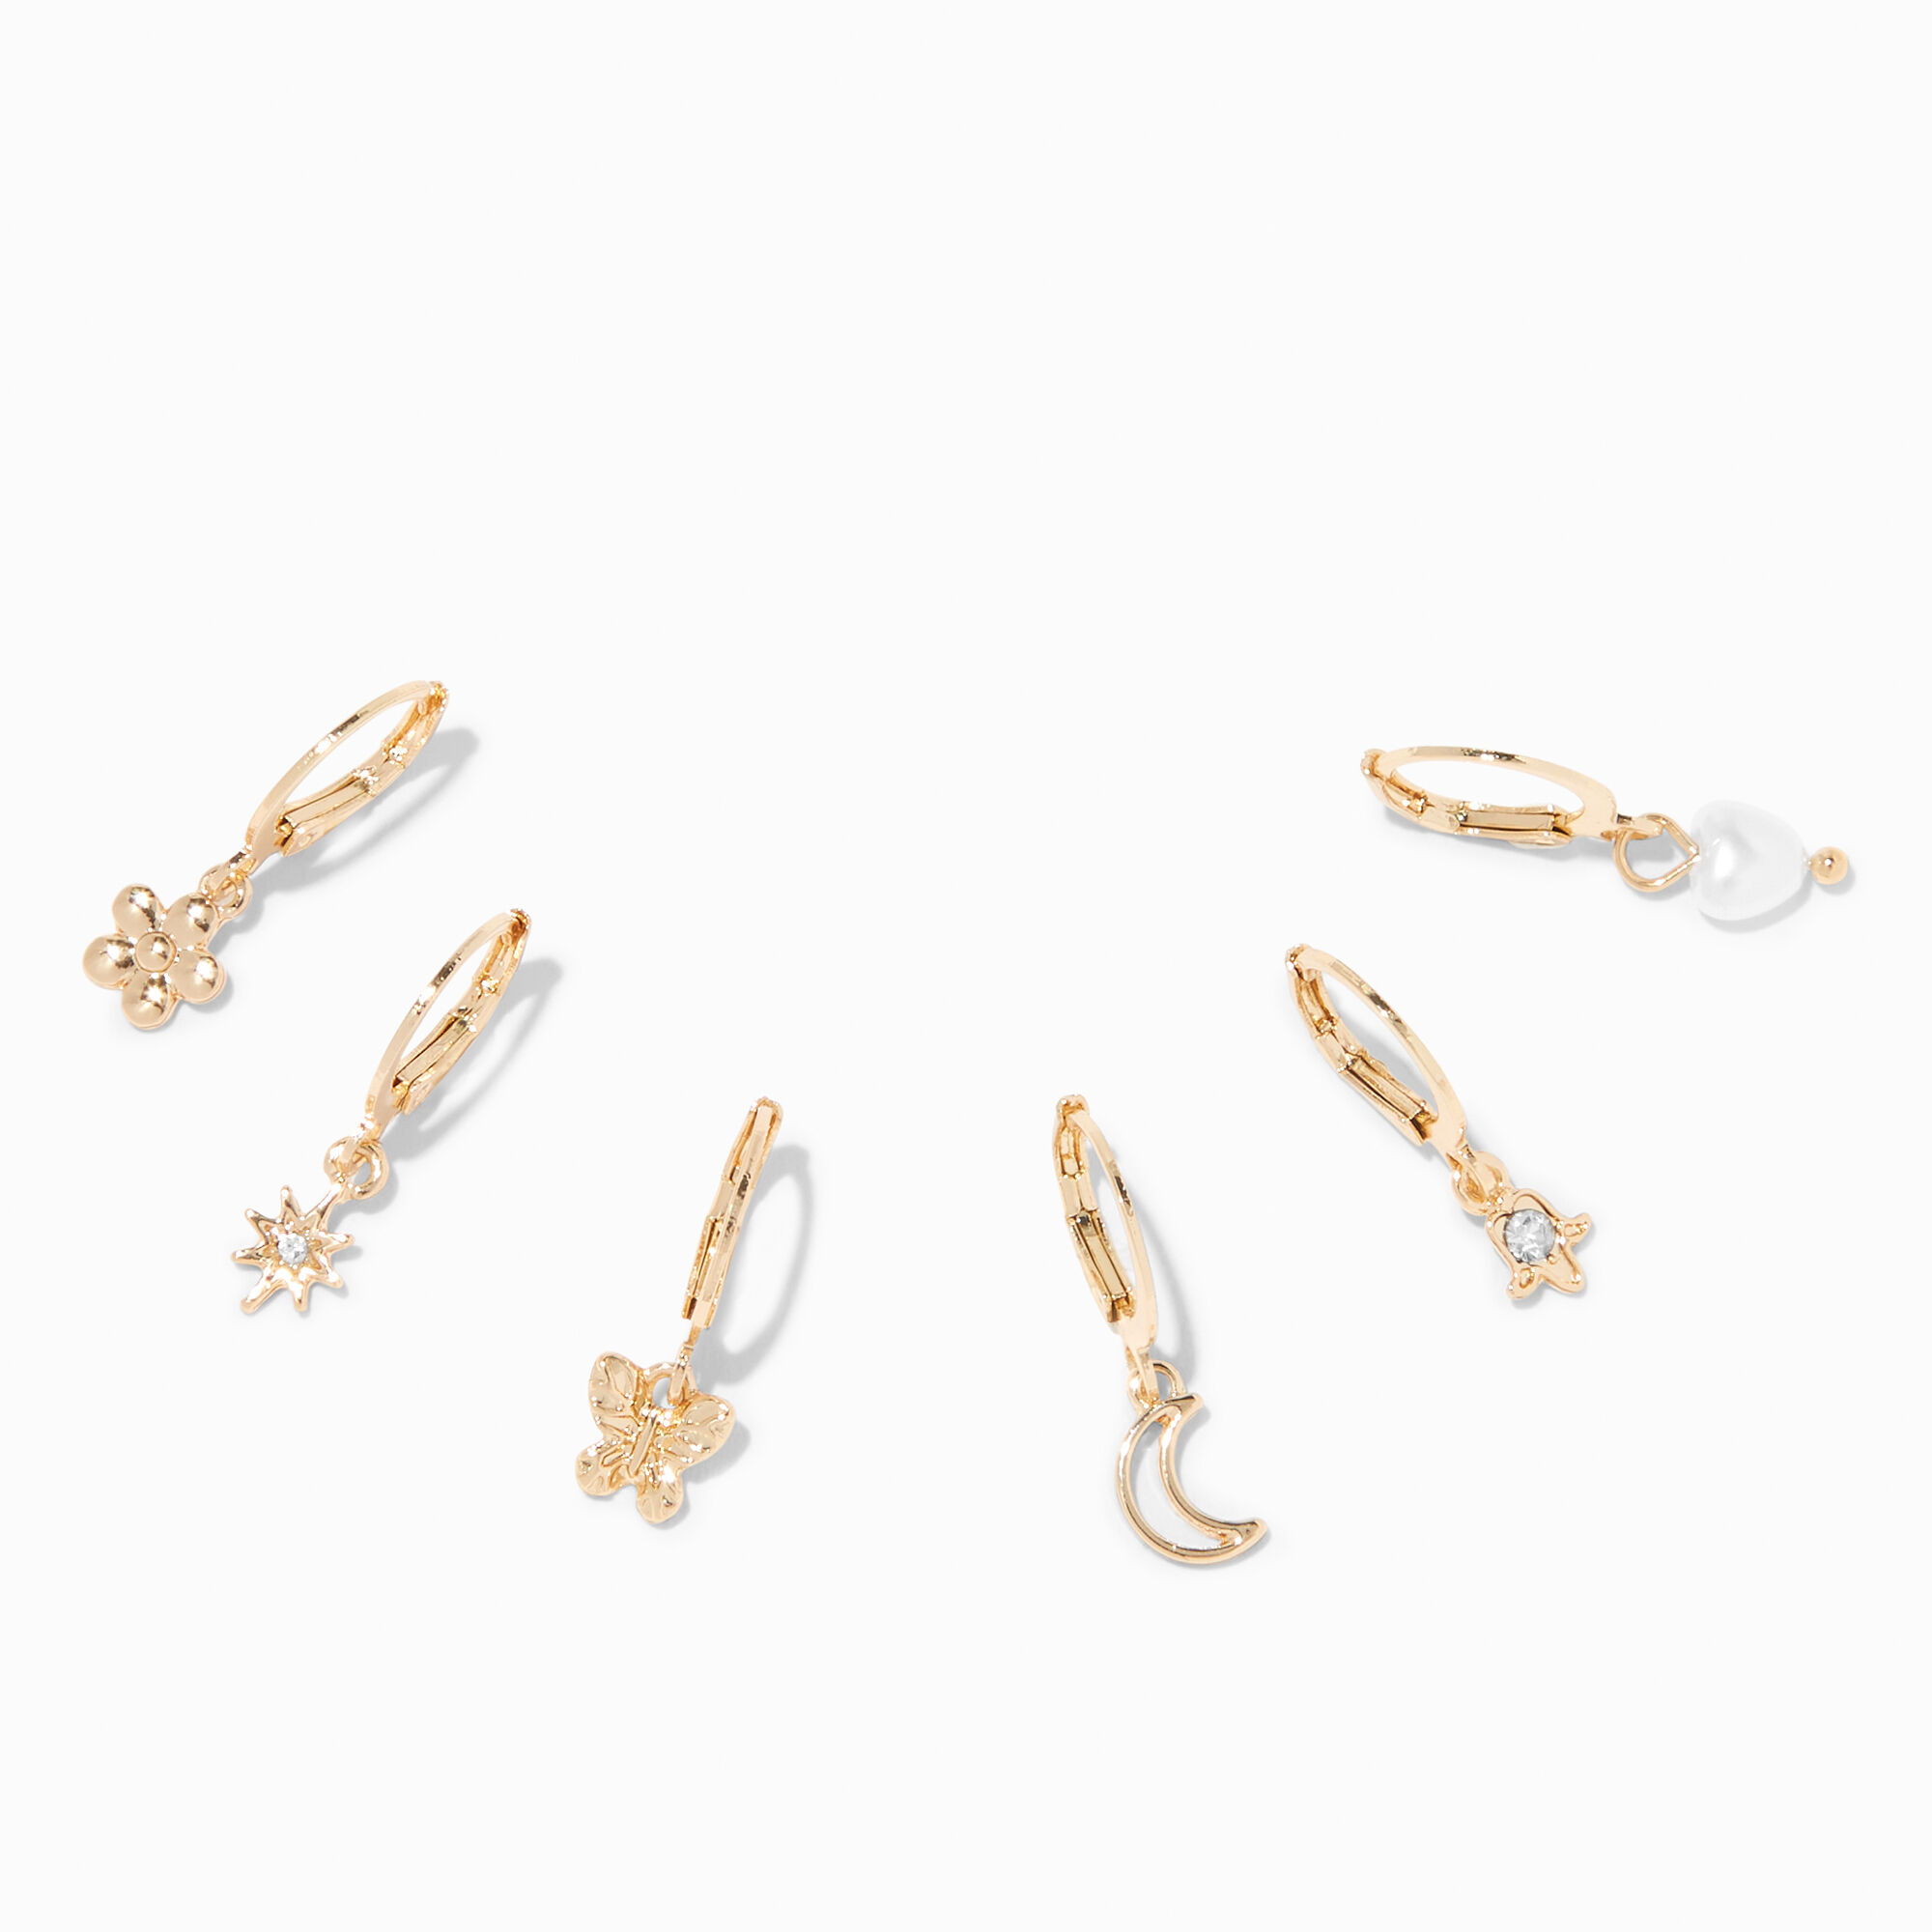 Gold Small Hoop Earrings Pack With Charm-silver Mini Hoop Dangle Earrings  With Charm- Huggie Hoop Earrings Set For Teen Girls And Women -z | Fruugo NO